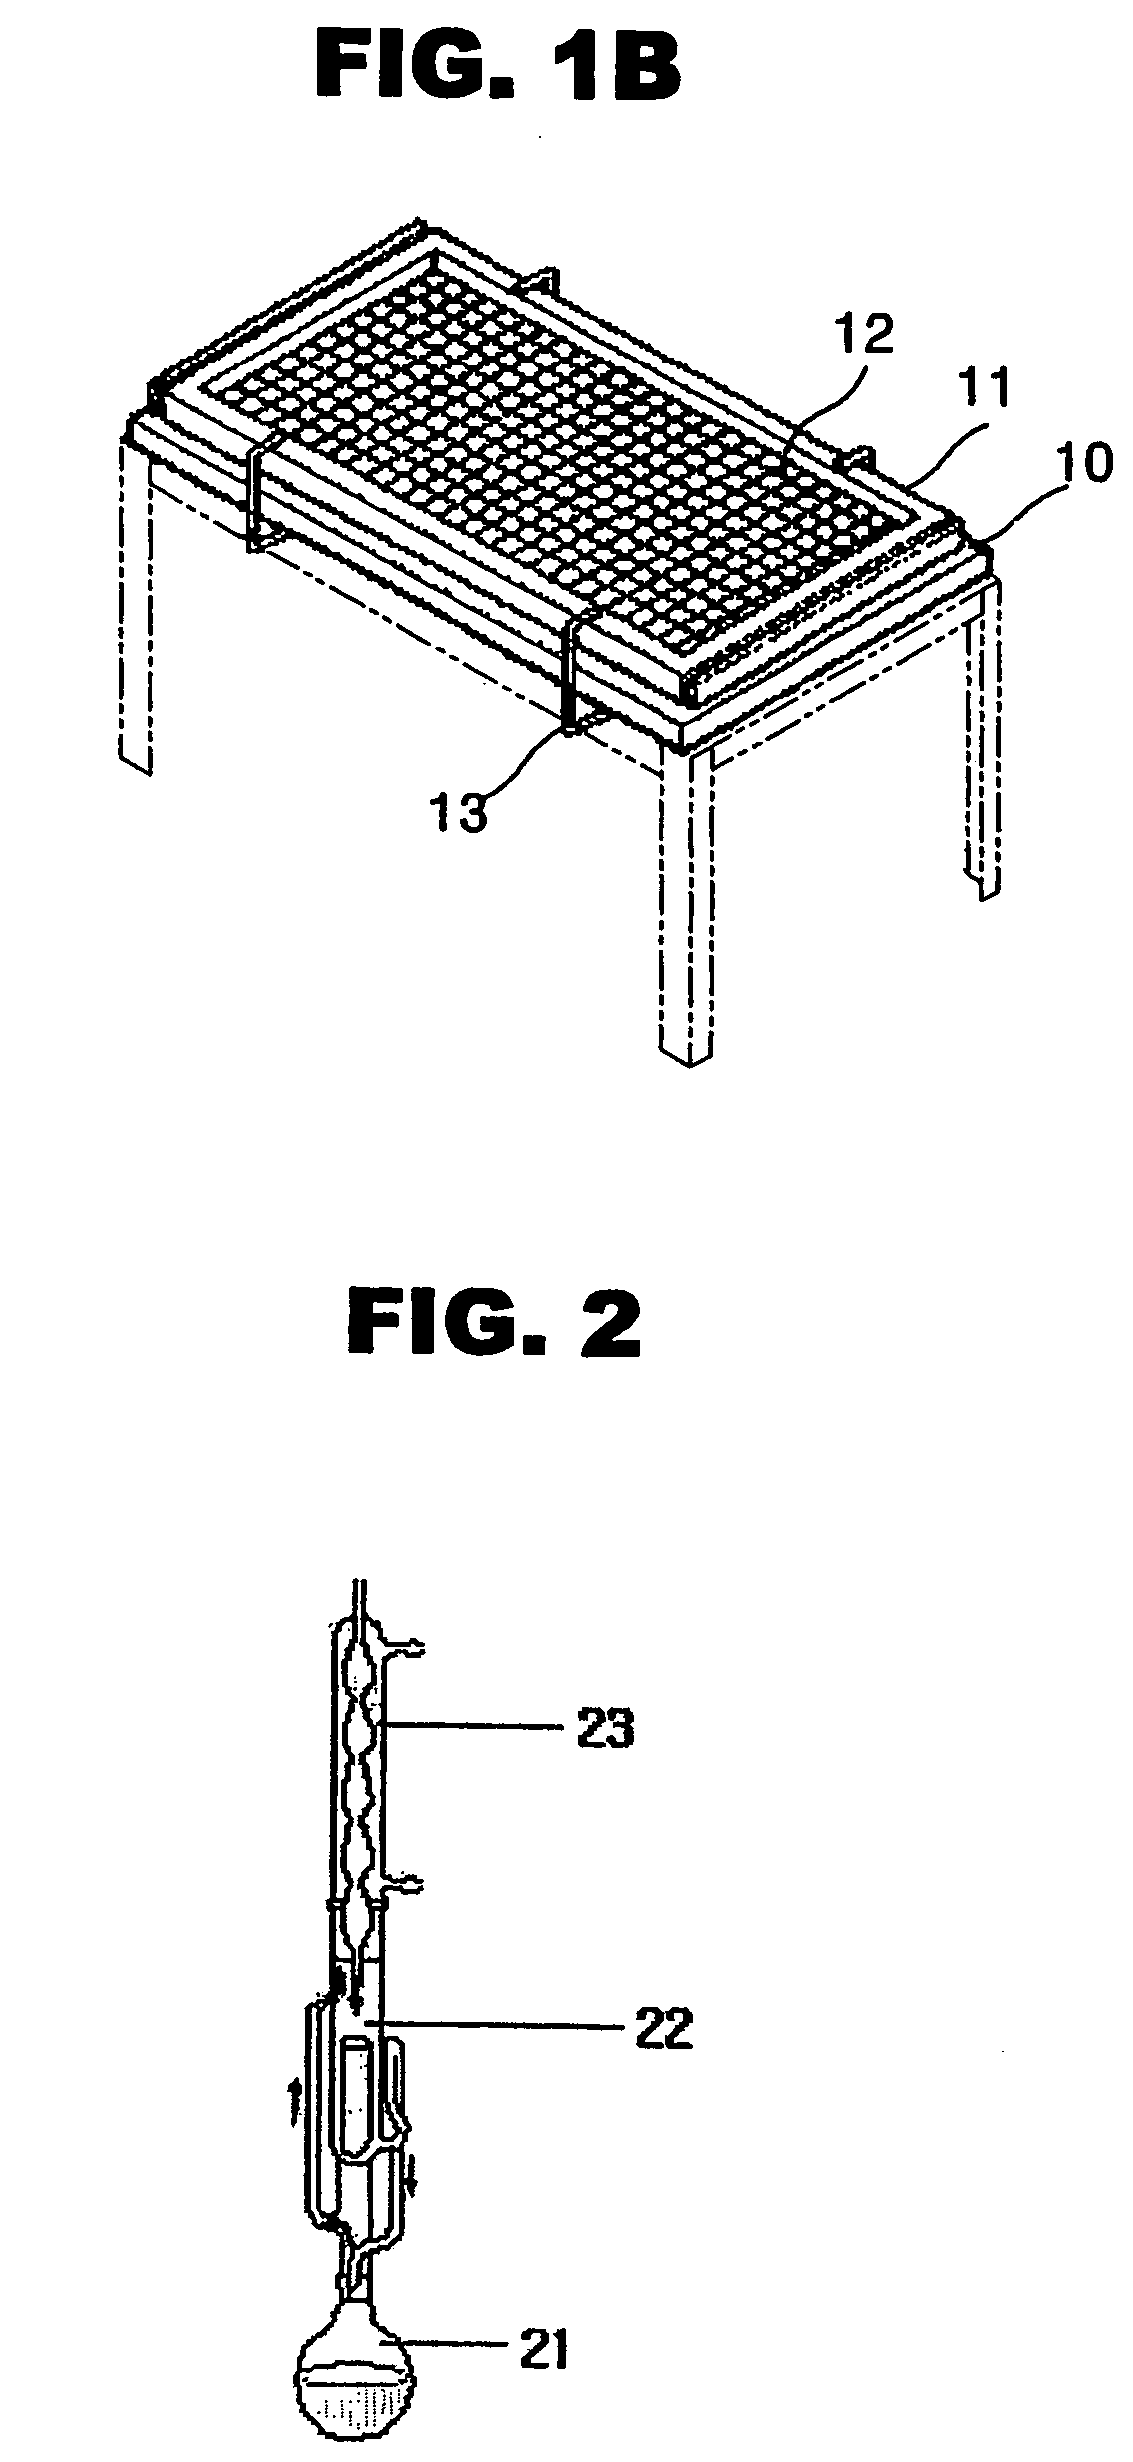 Method of extracting rutin from buck wheat growed by hydroponics